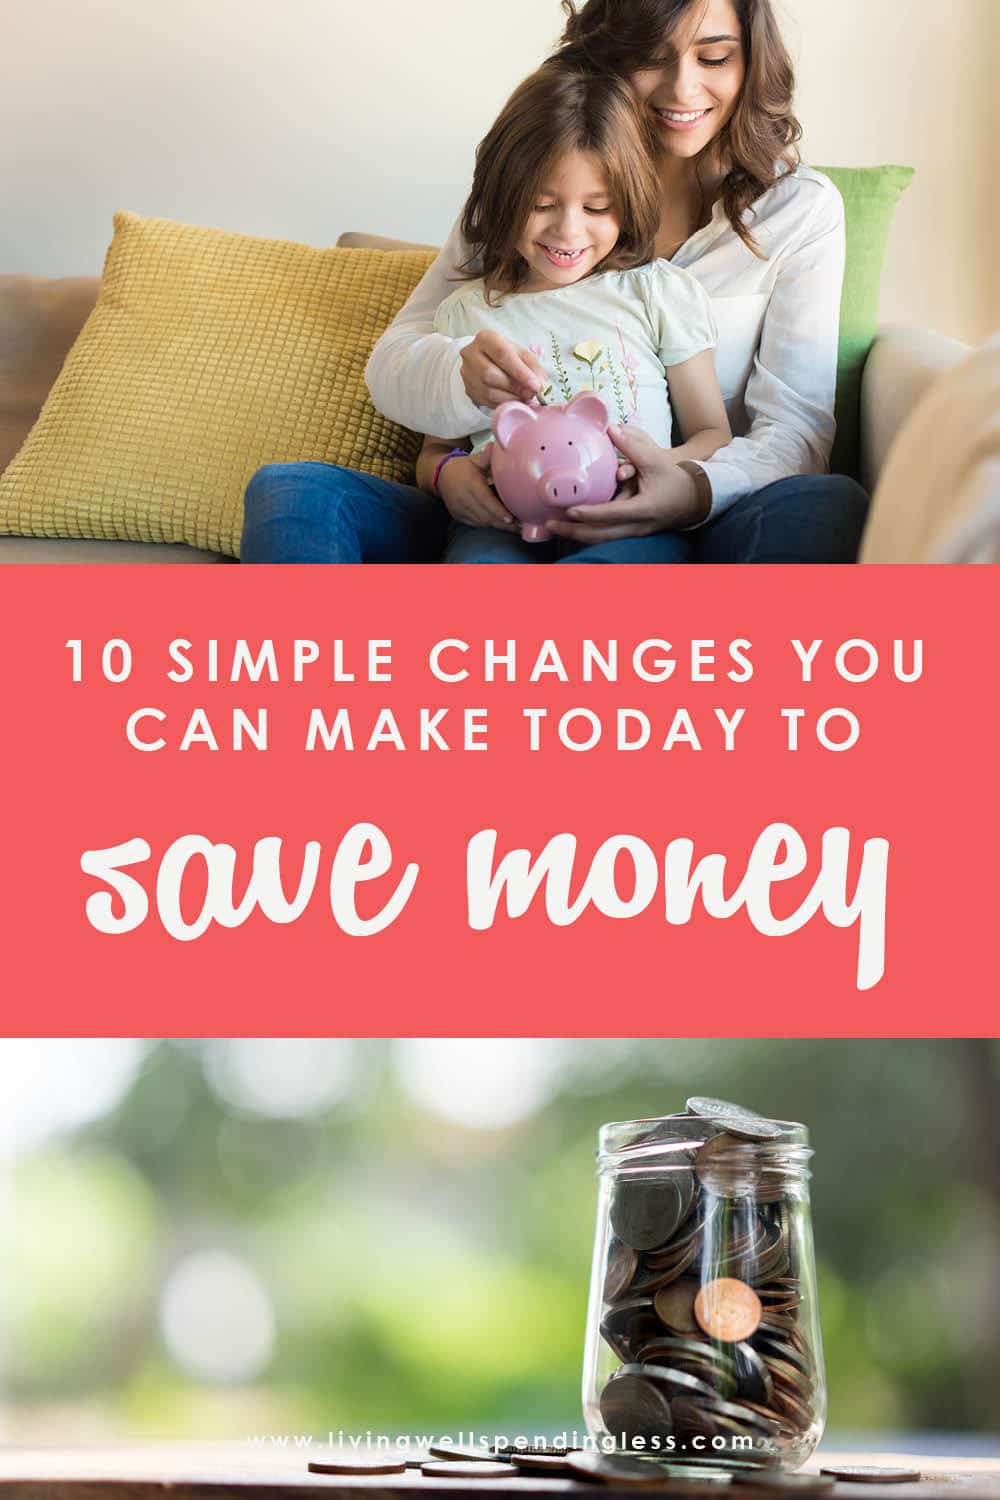 Think saving money has to be painful? Think again! Small but purposeful changes in your daily life can have a surprisingly big impact on your budget over time. Don't miss these 10 simple changes you can make TODAY to save big tomorrow! #moneysavingtips #savings #moneytips #smartmoney